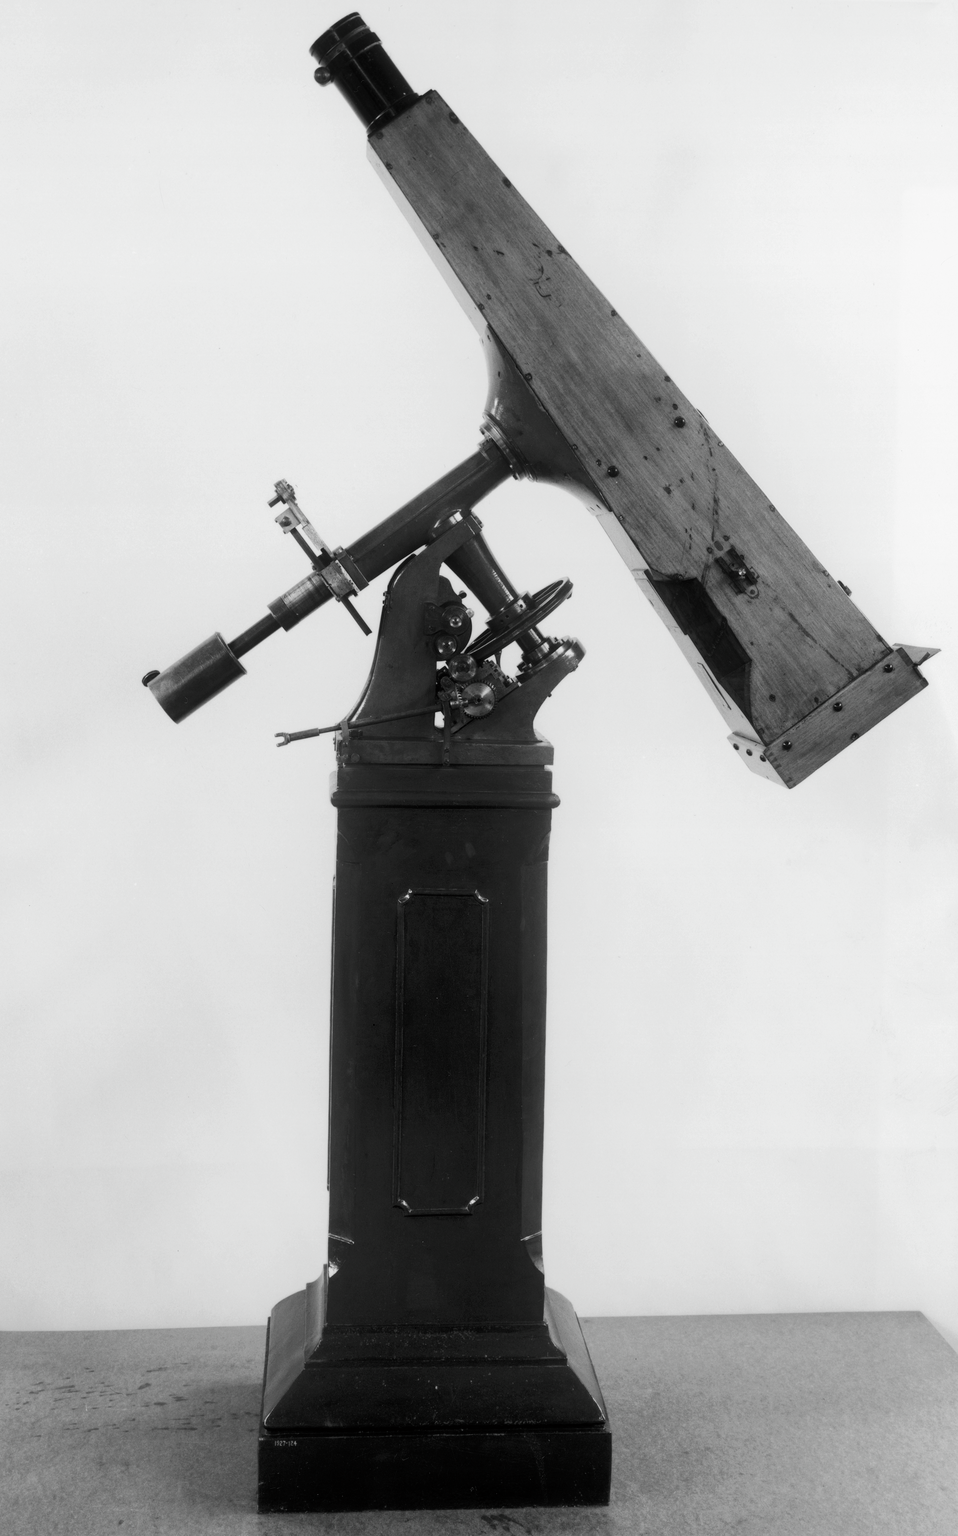 The Kew Photoheliograph is on display in Cosmos & Culture (Science Museum).